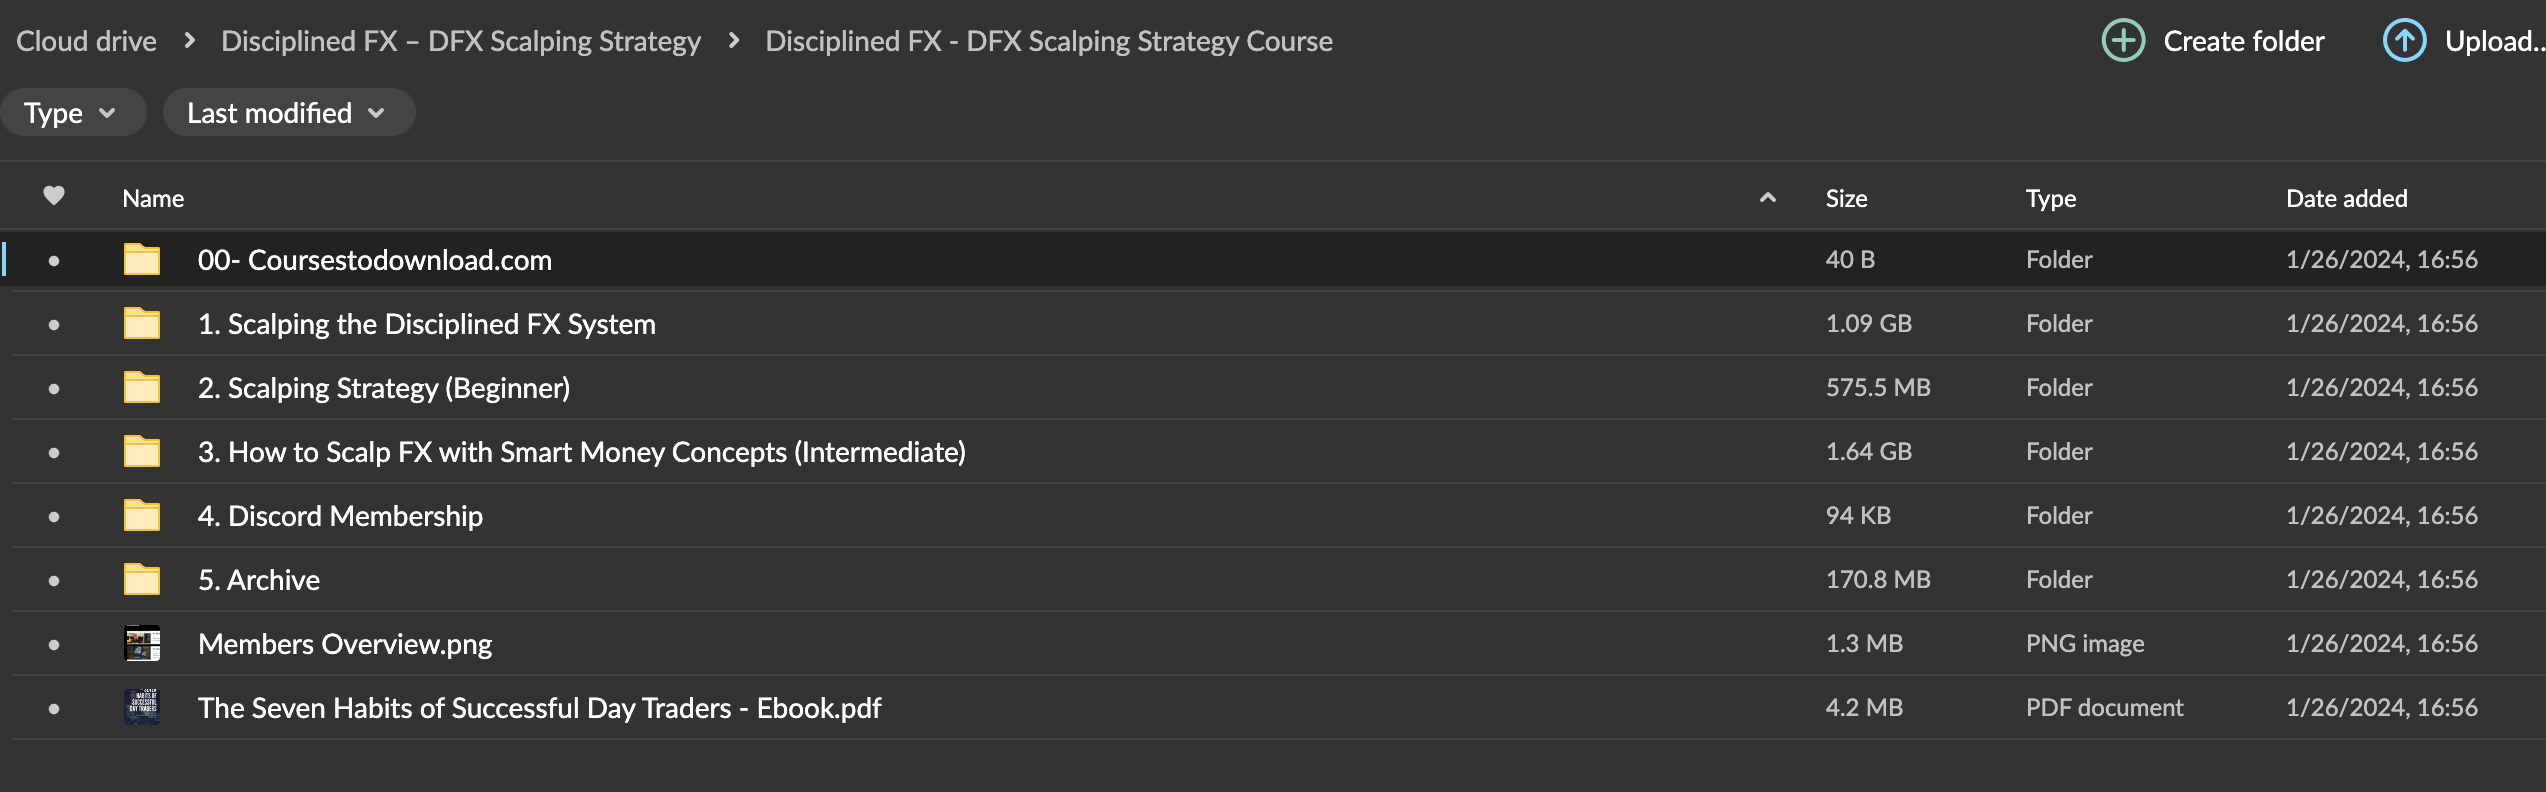 Disciplined FX – DFX Scalping Strategy Download